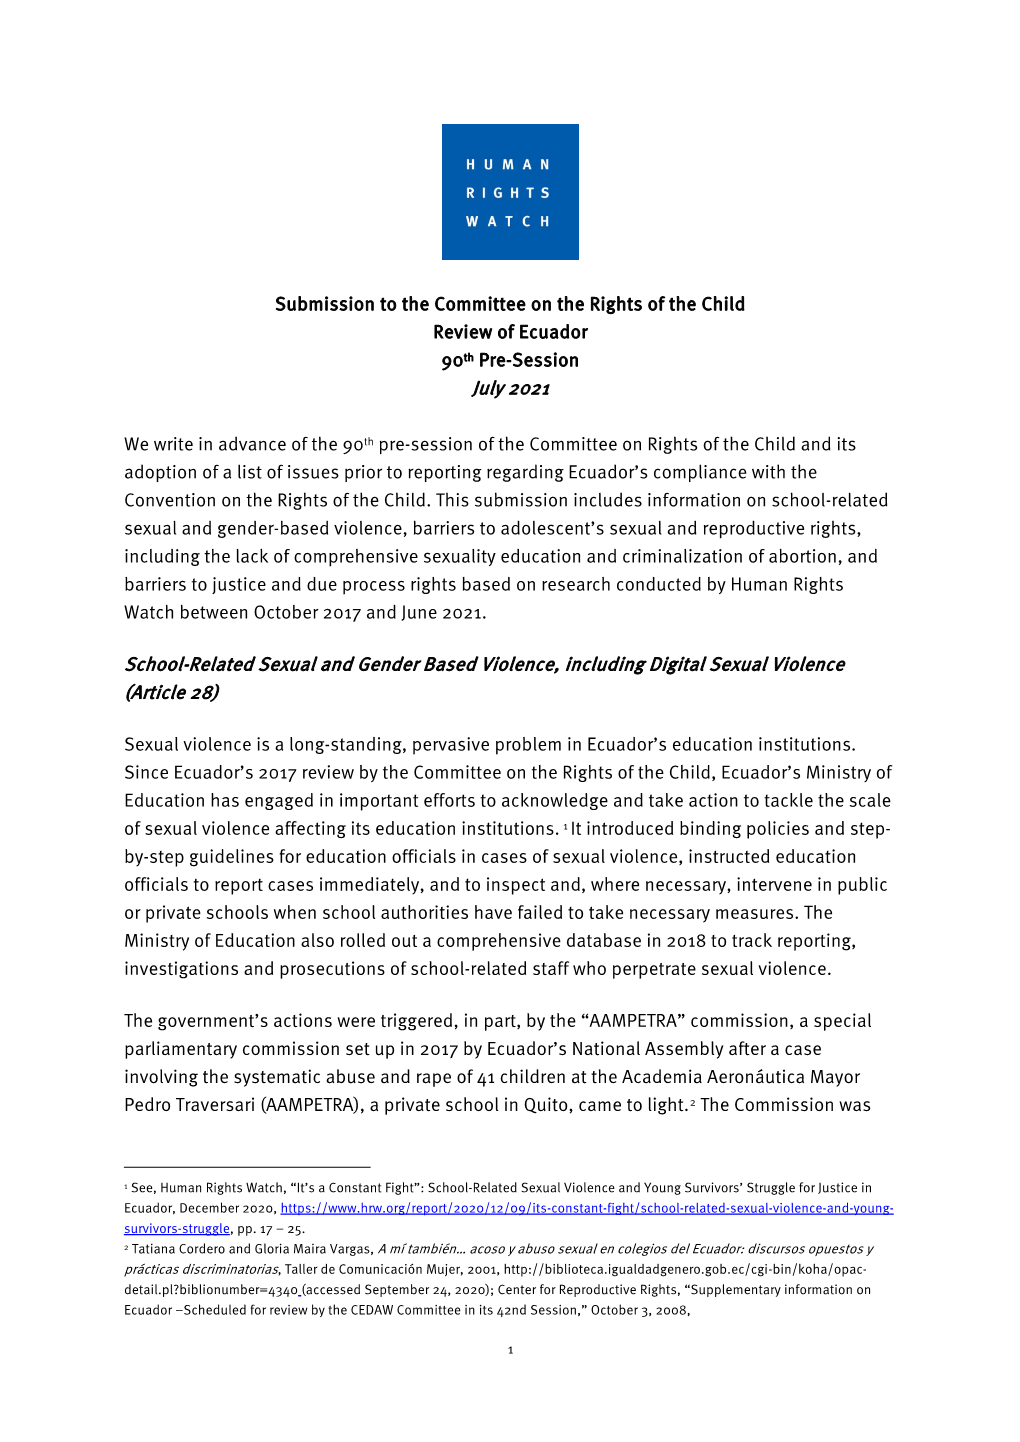 Submission to the Committee on the Rights of the Child Review of Ecuador 90Th Pre-Session July 2021